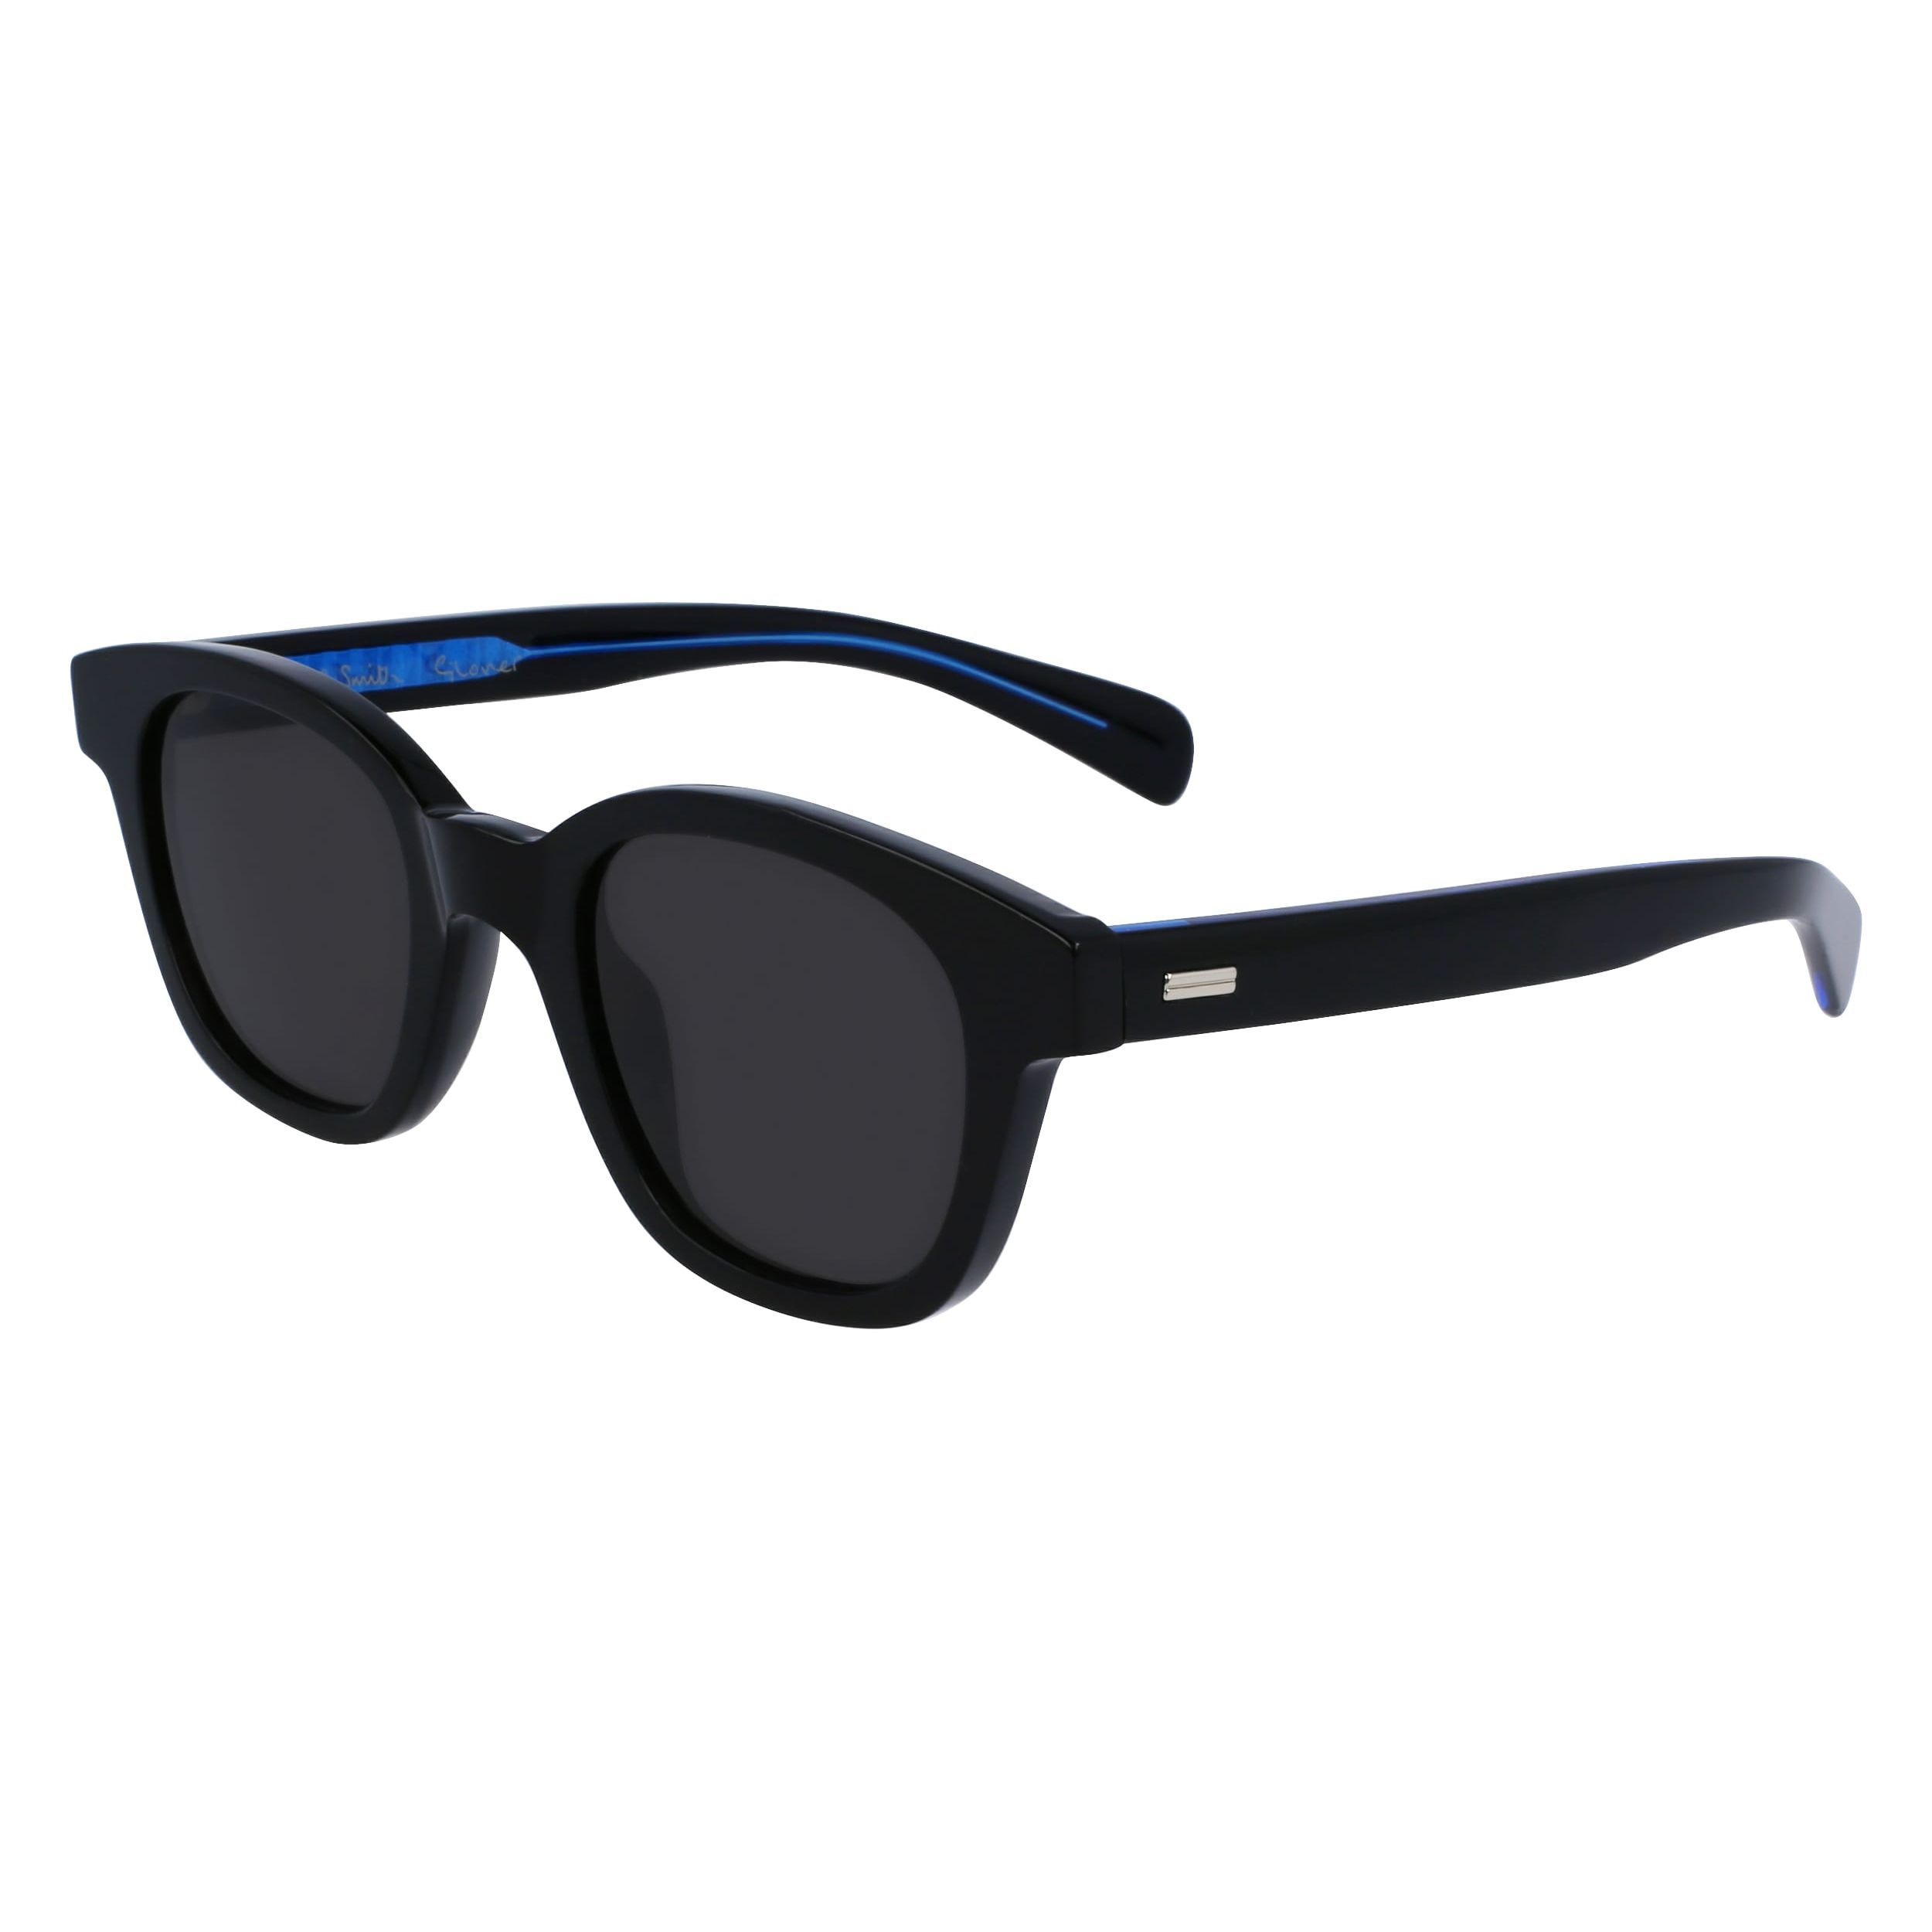 GLOVER Oval Sunglasses 001 - size 49